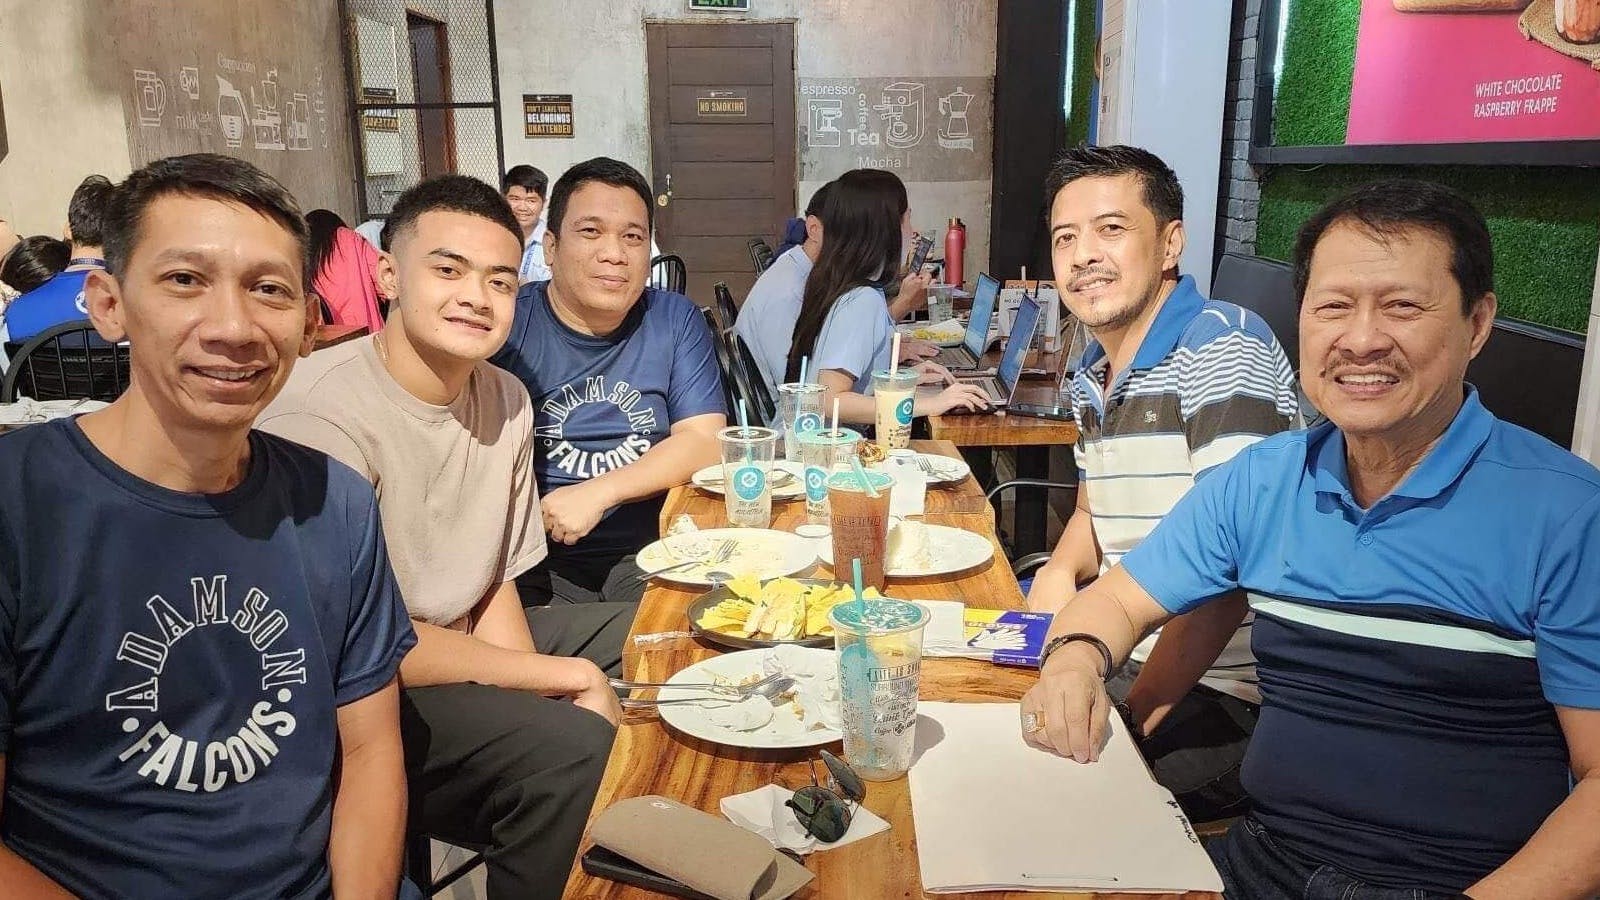 Adamson welcomes ‘great addition’ to Falcons